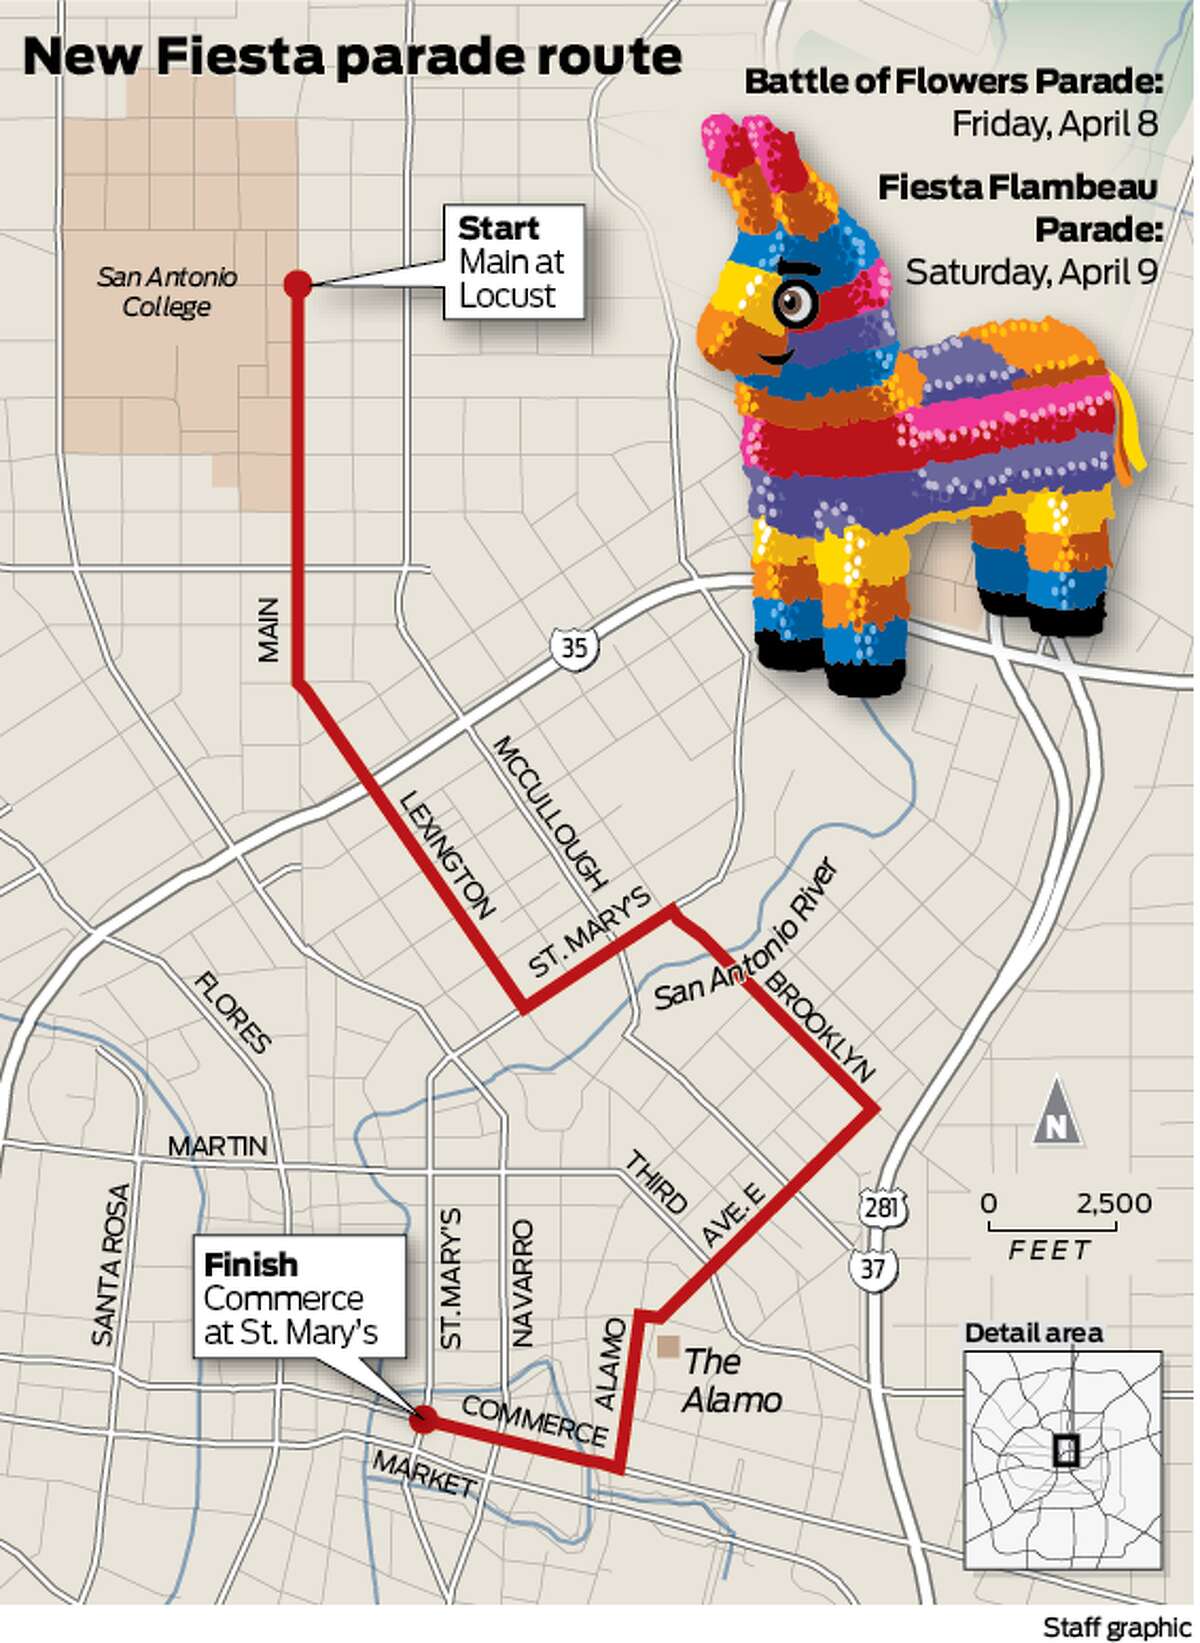 Fiesta parade route 2022 Where to get the best views for Battle of